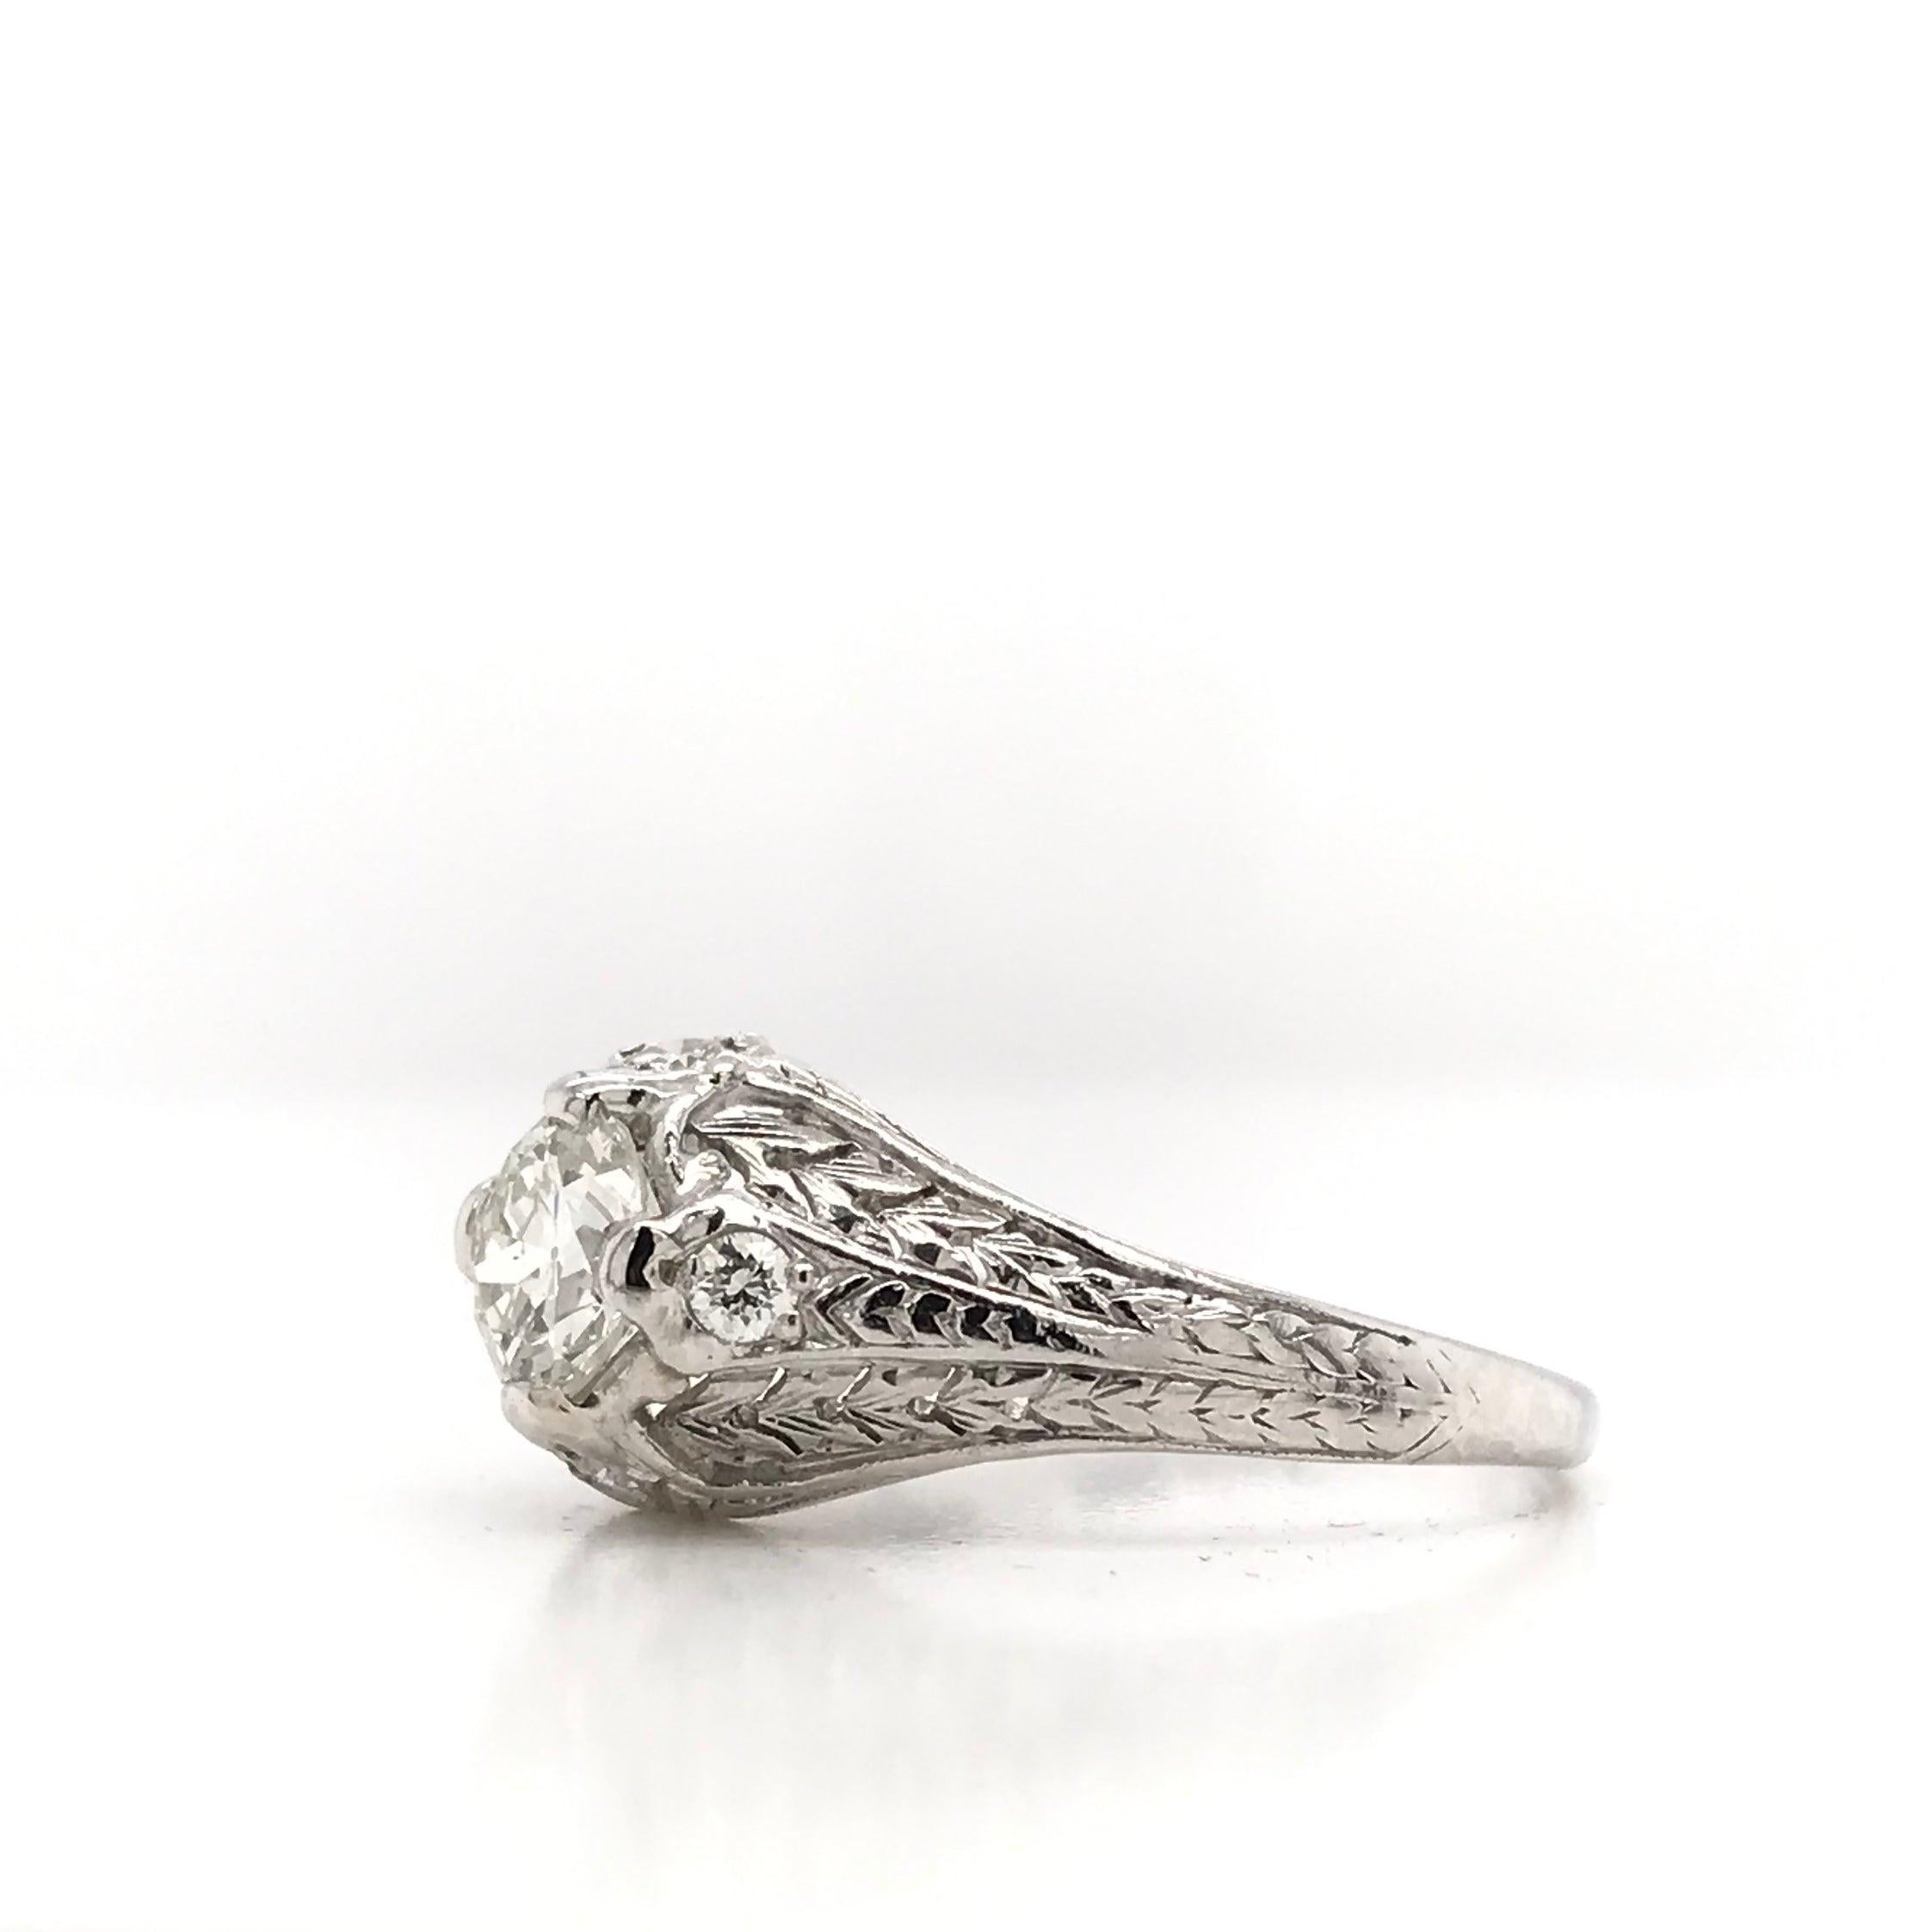 This antique piece was handcrafted sometime during the Edwardian design period ( 1901-1920 ). The setting is platinum and features many charming details. The center diamond measures approximately 0.71 carats and grades I in color, SI1 in clarity.